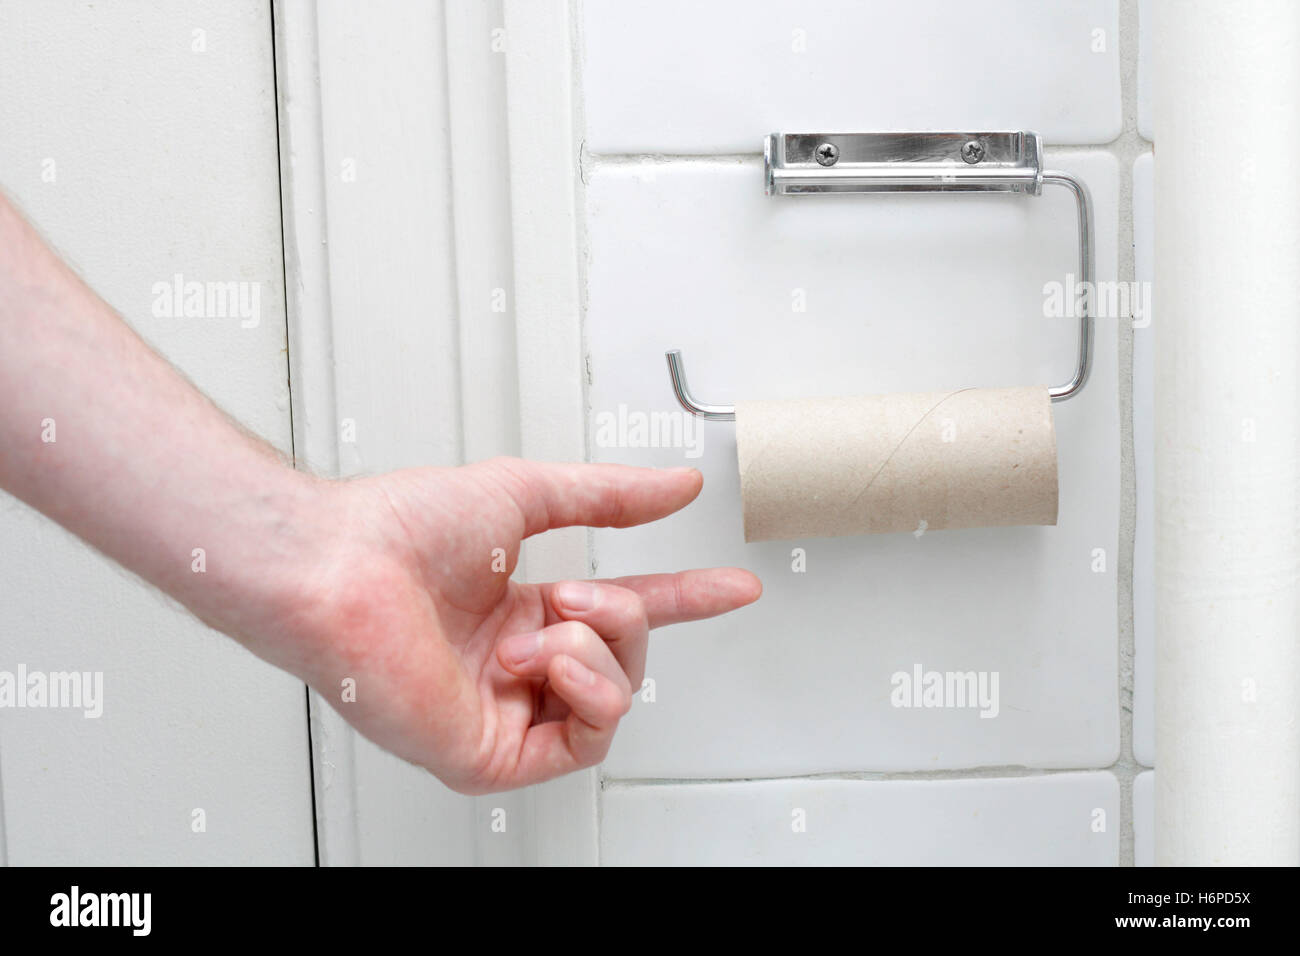 accident no toilet nothing used empty catastrophe lack incident bathroom sheet of paper paper hand give not restroom tissues Stock Photo